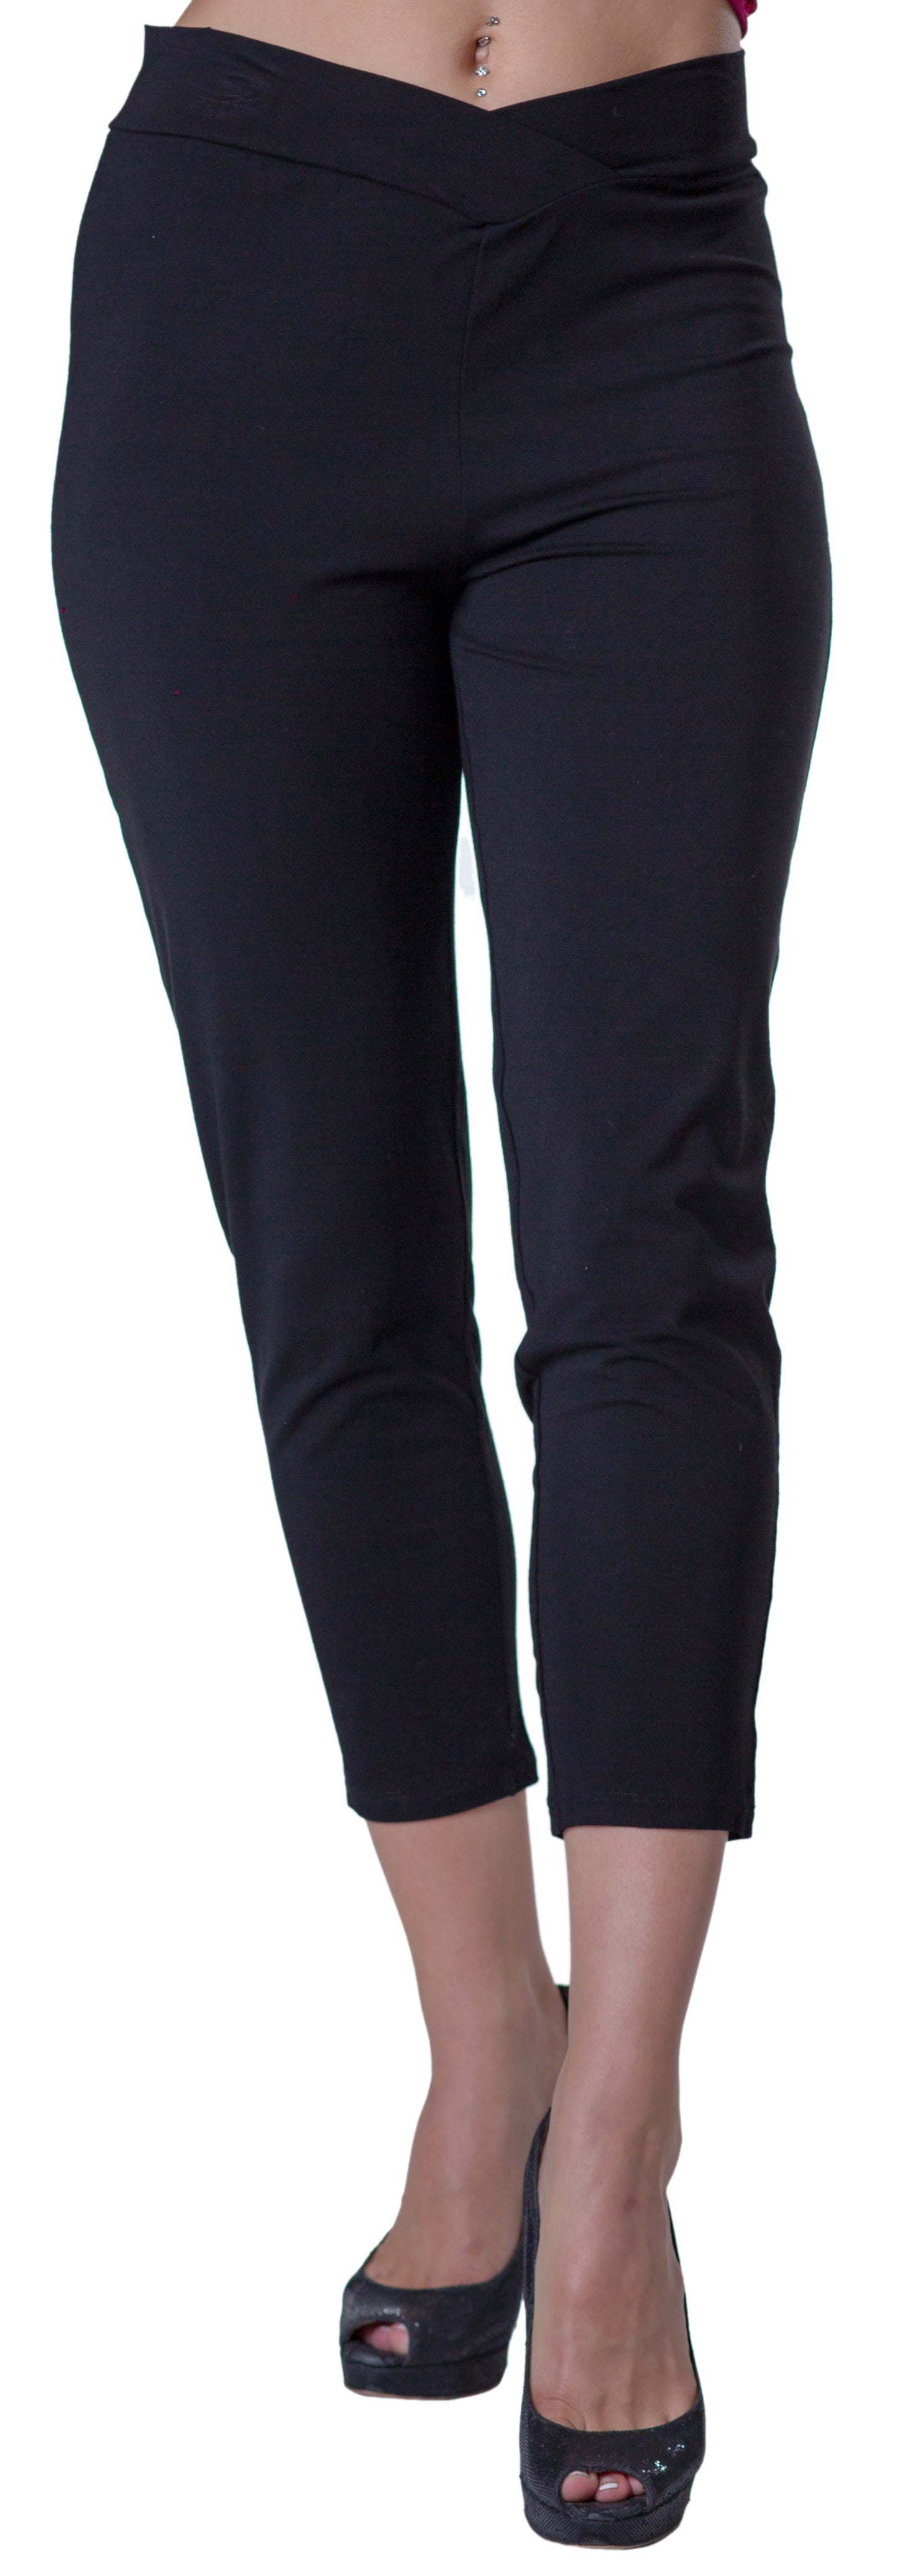 Women's Black Solid Polyester Capris